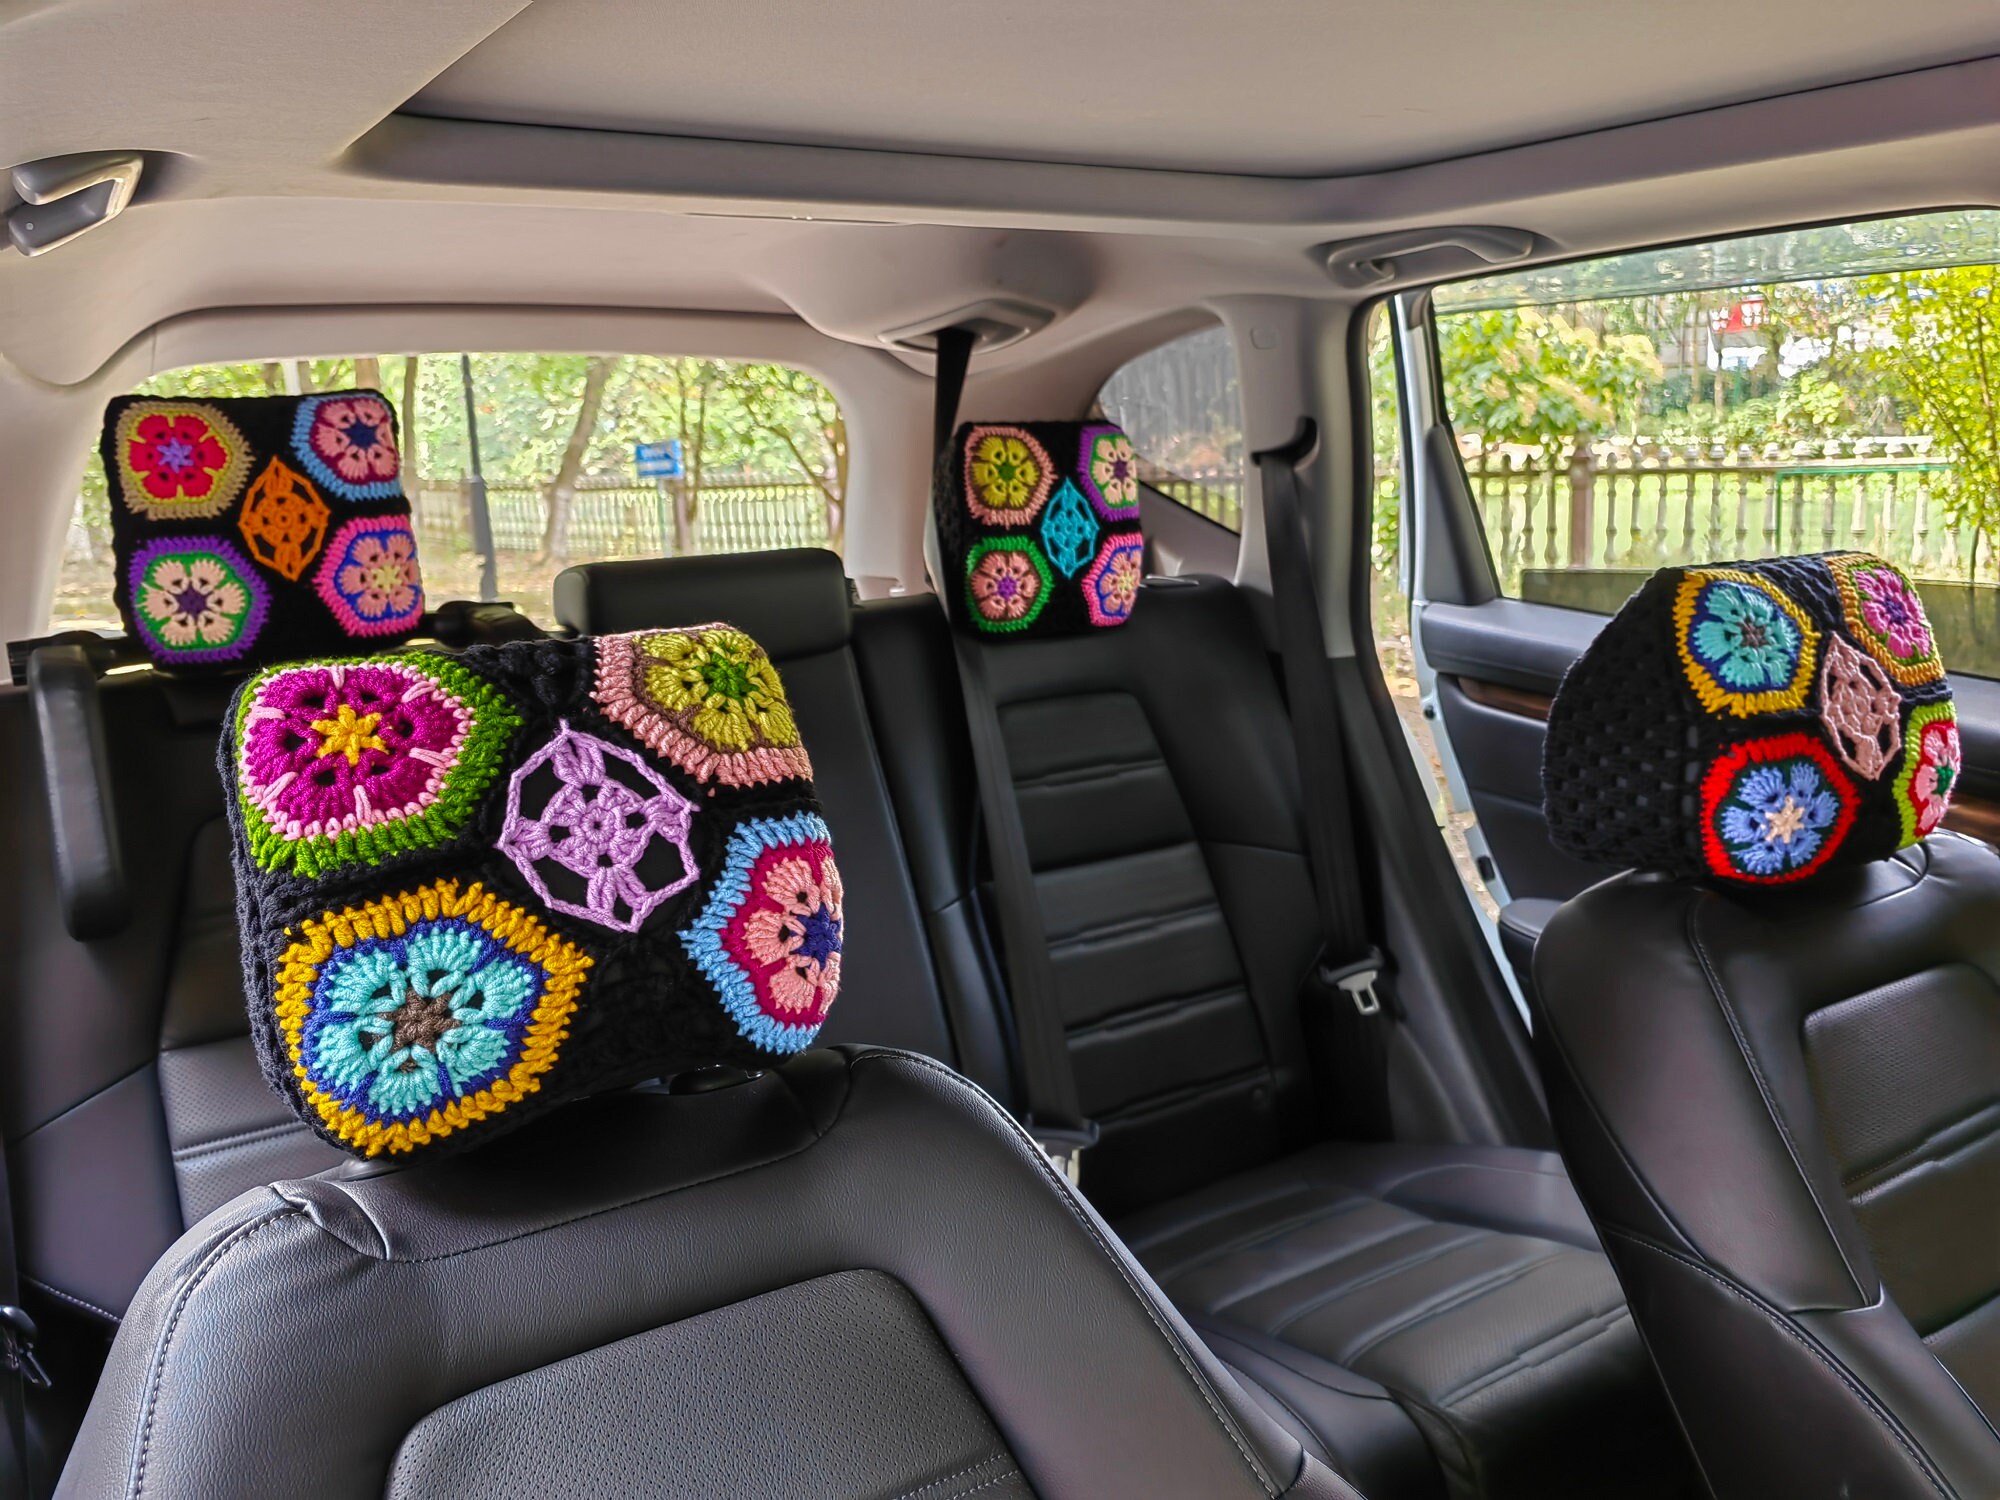 Car Seat Cover,crochet Seat Covers,rainbow Granny Square Steering Wheel  Cover Seat Cover Headrest Covers Car Accessories,car Interior Design 